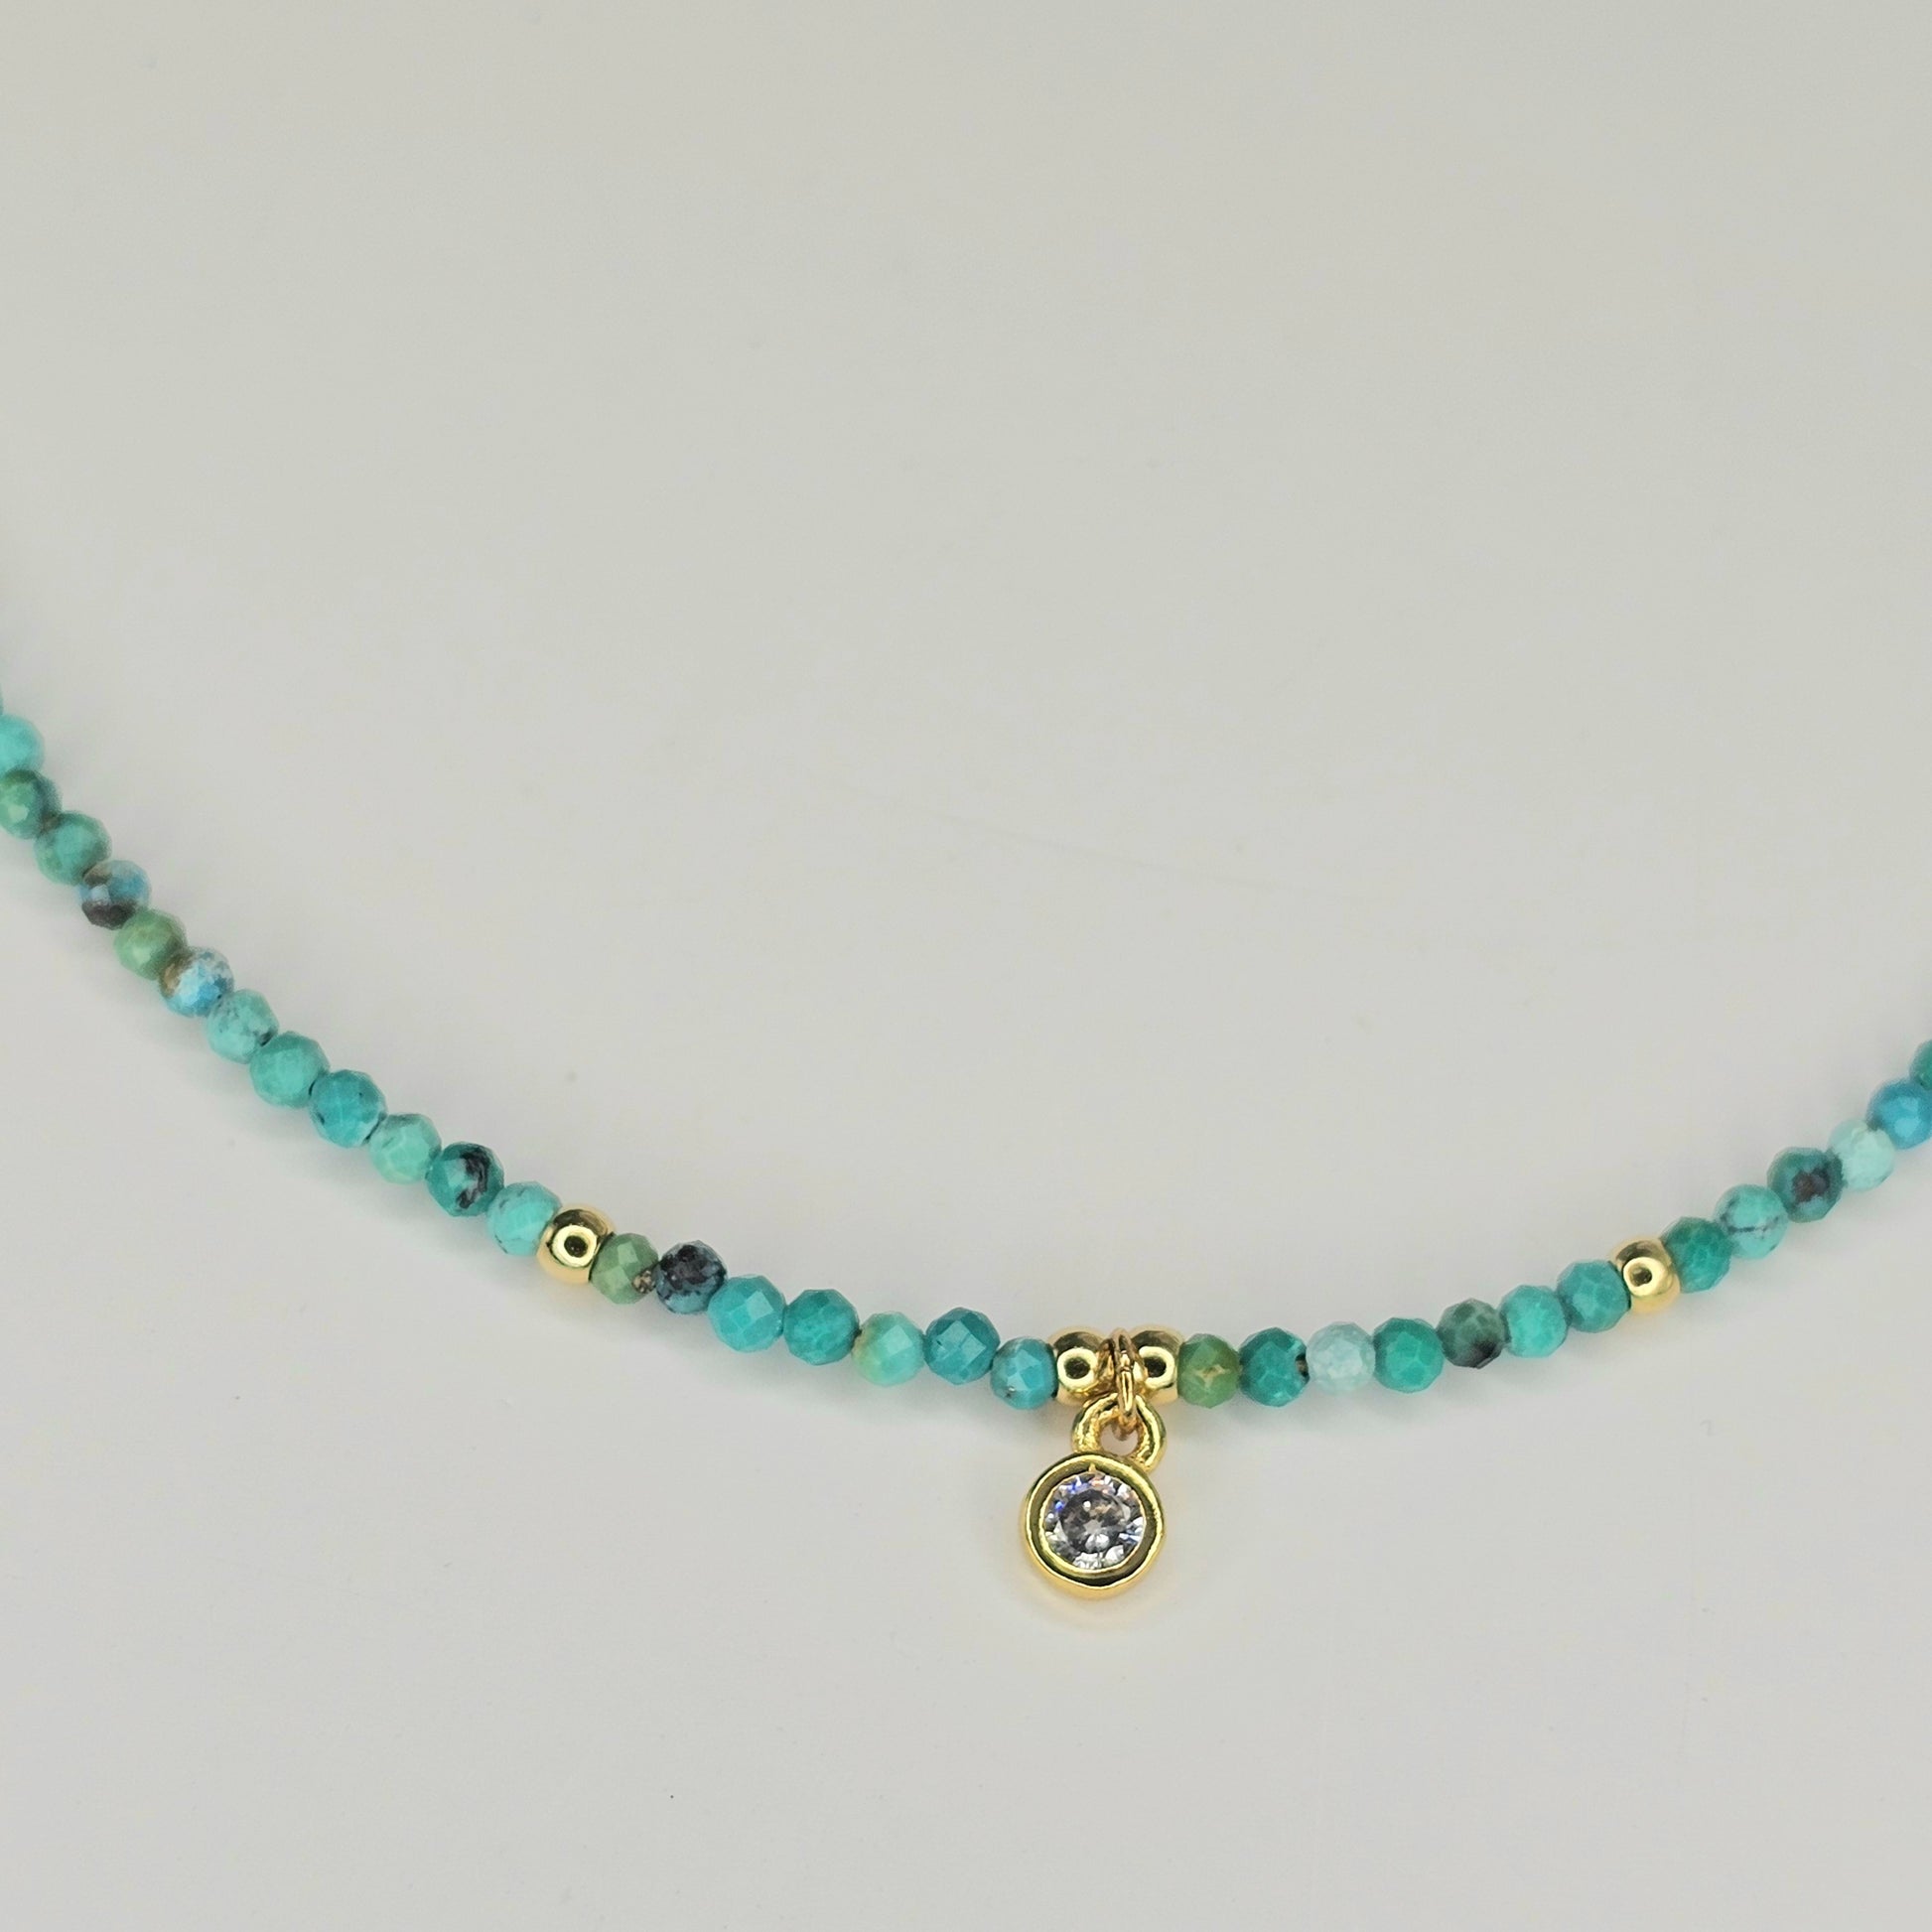 Delicate, faceted Turquoise bead necklace with an AAA grade CZ pendant and gold toned stainless steel clasp.